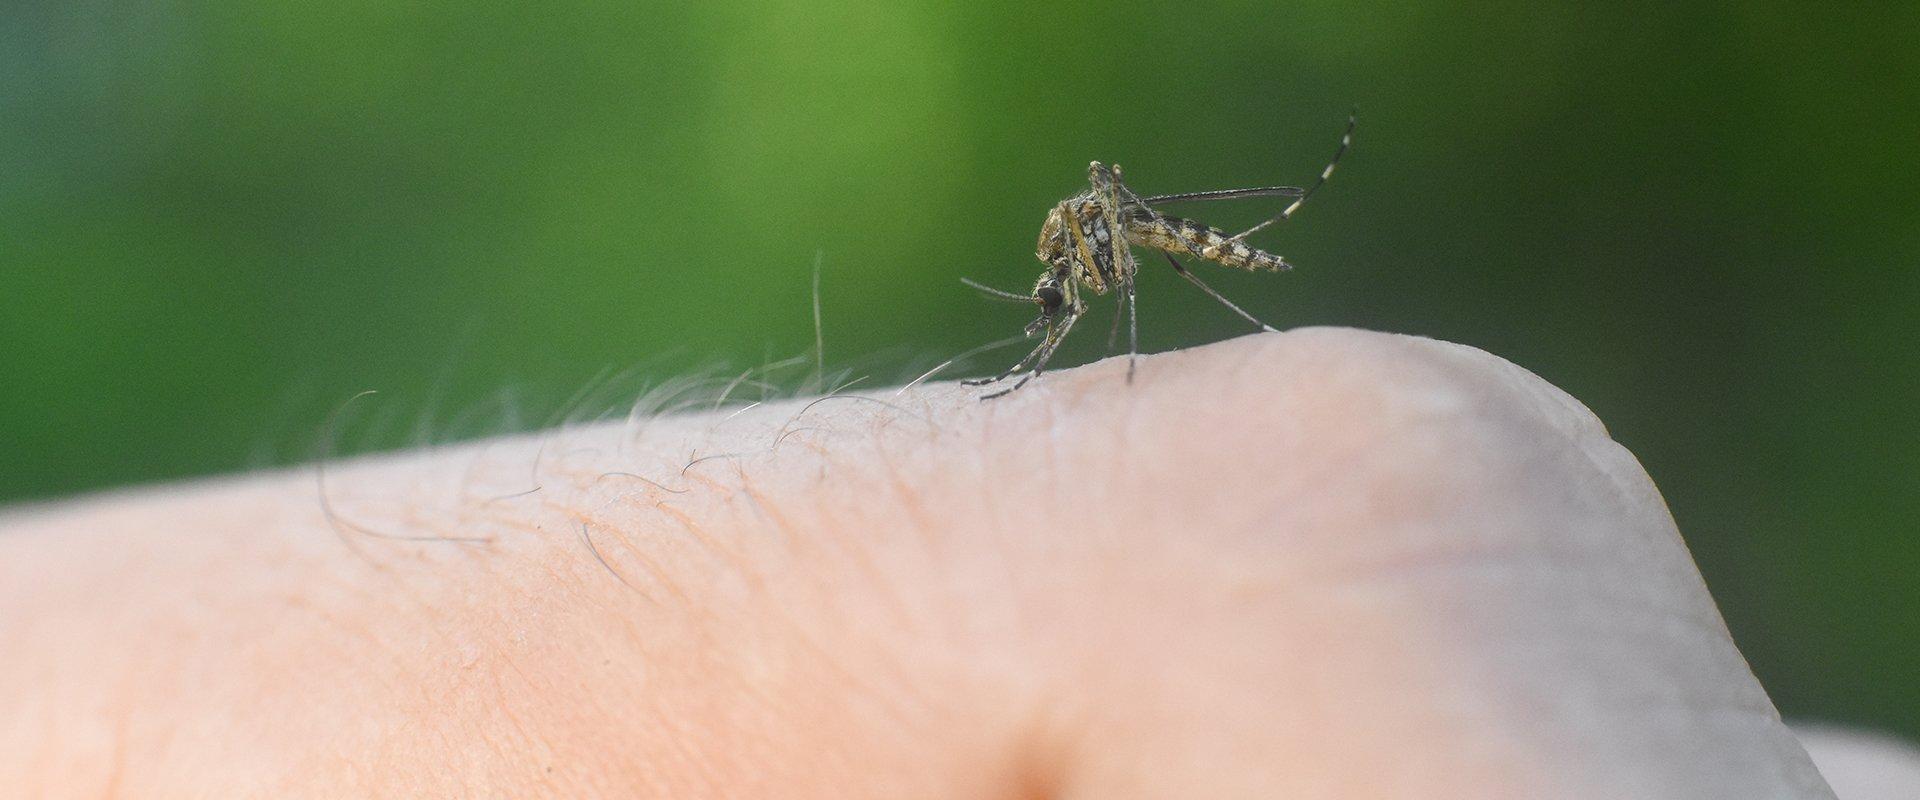 a mosquito biting a hand